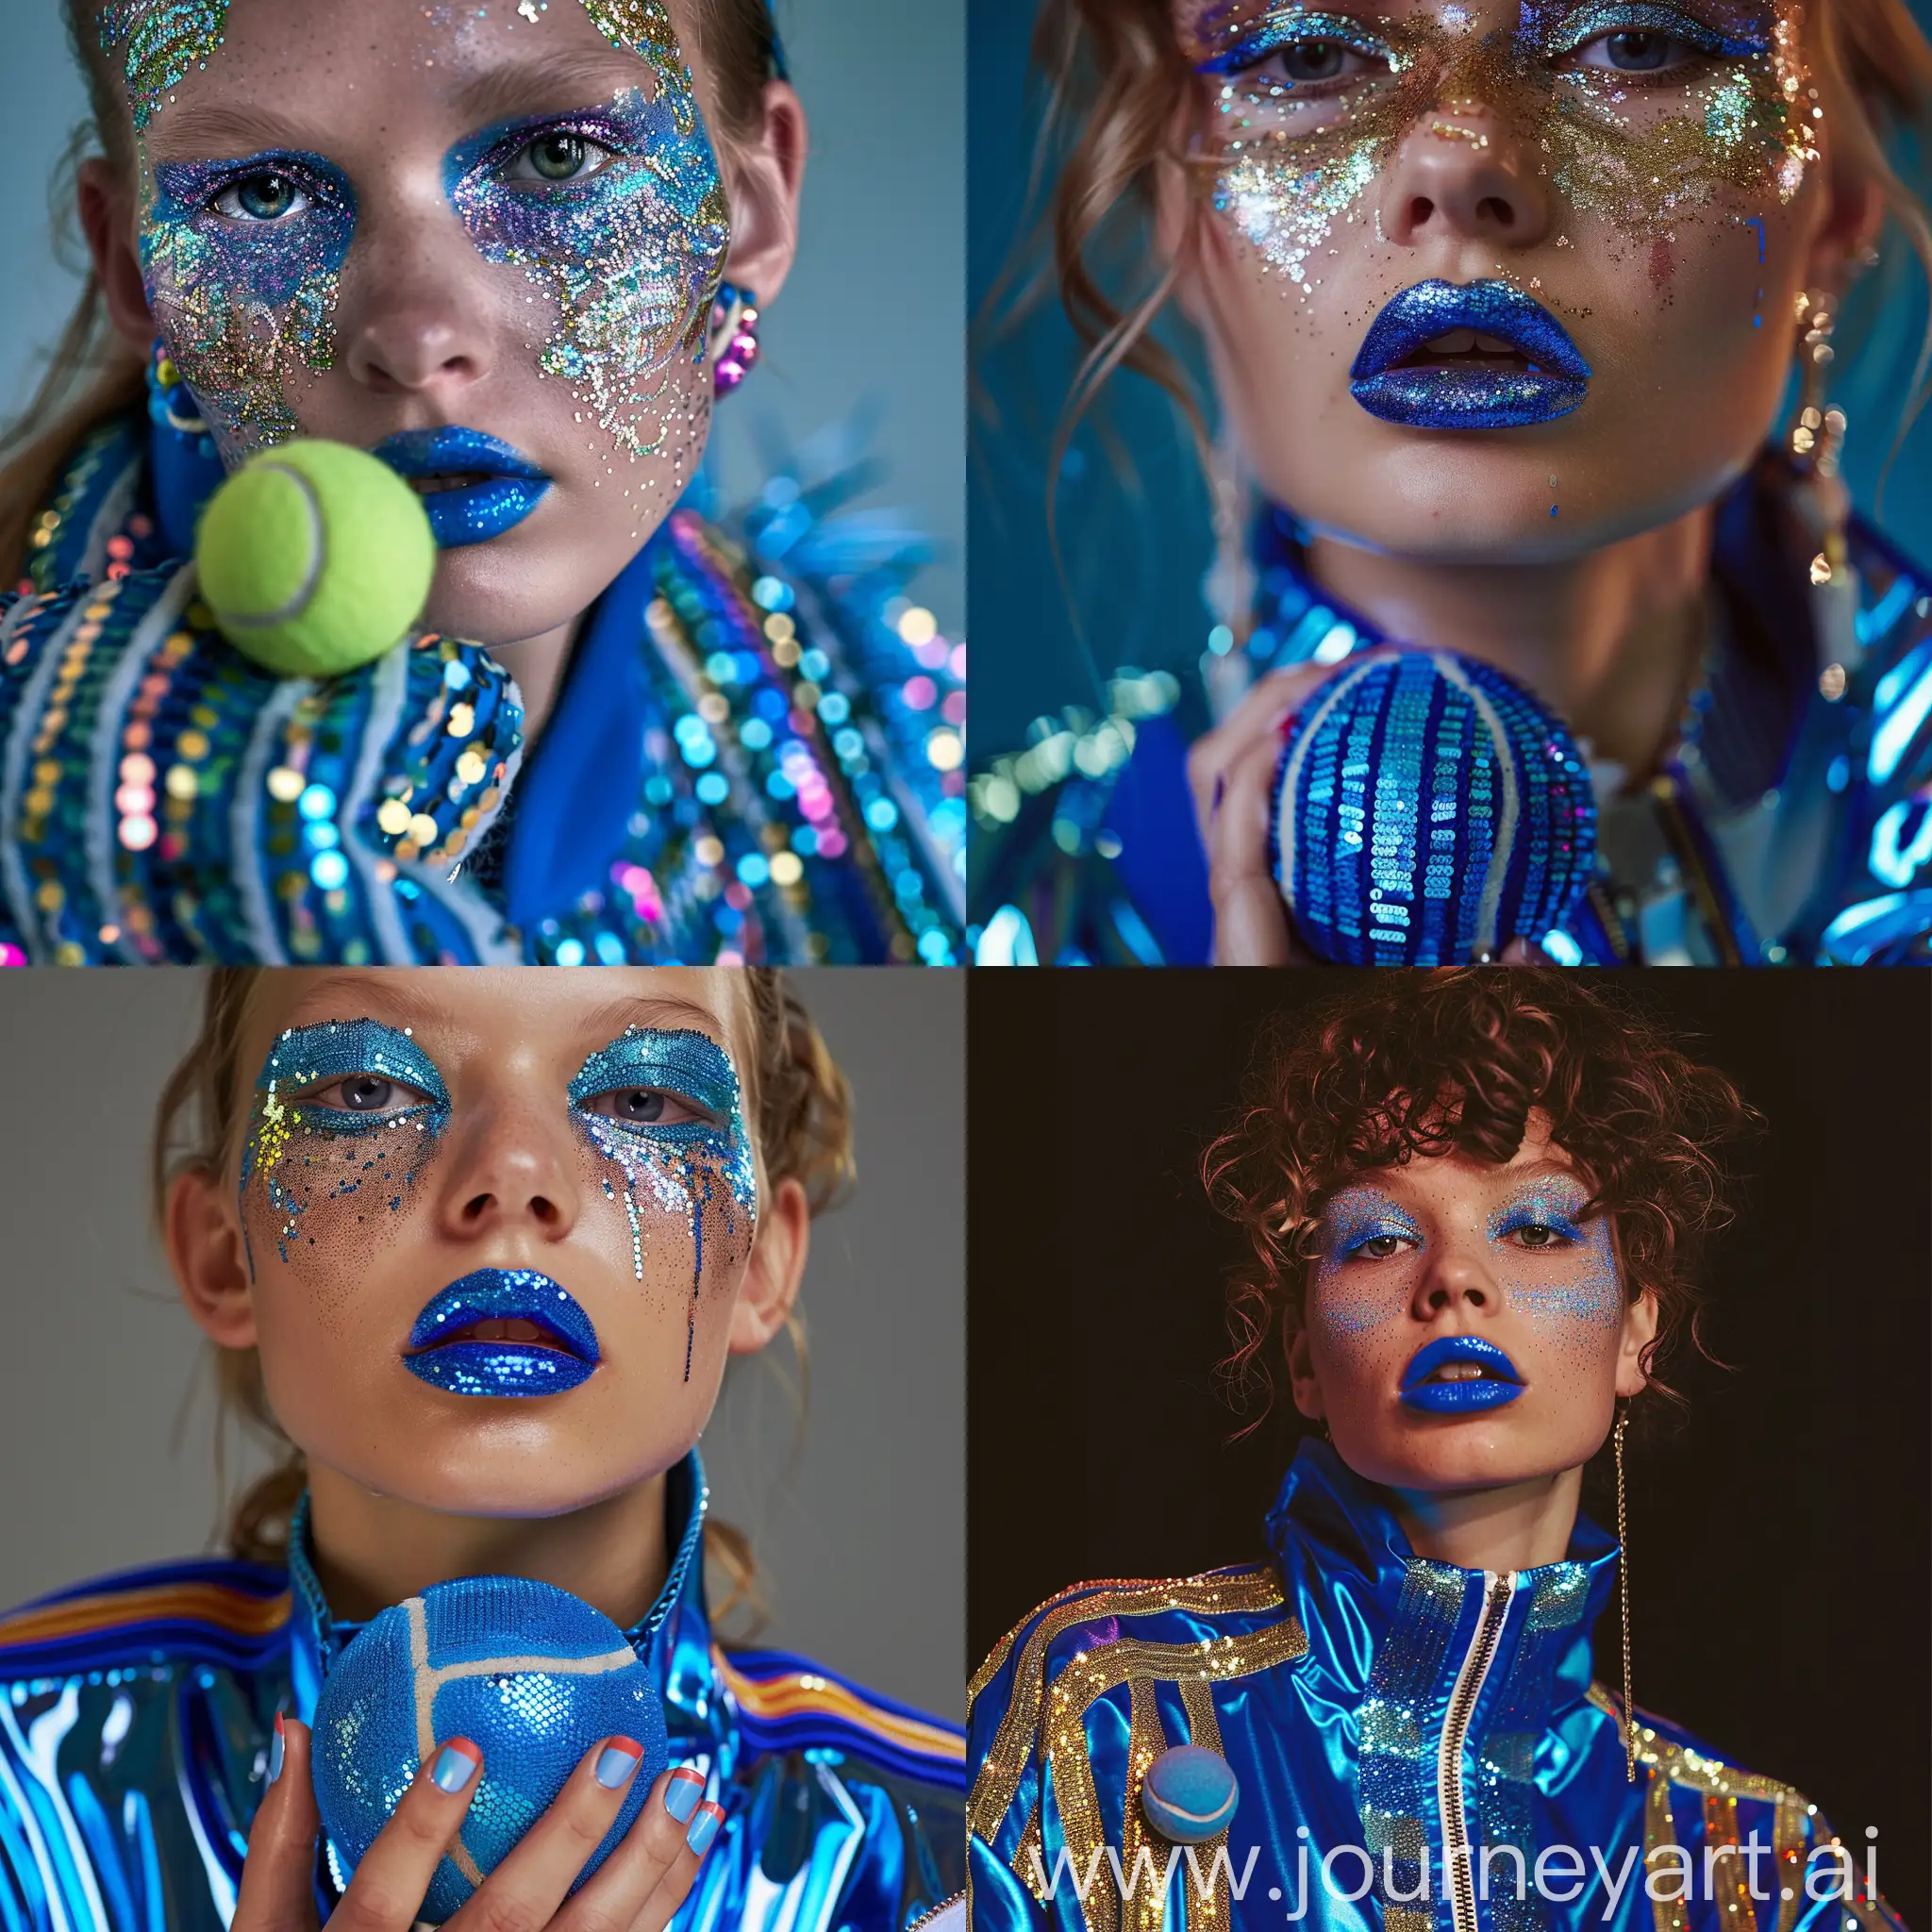 Chic-Sporty-Fashion-Model-in-Oversize-Blue-Satin-Olympic-Jacket-with-Sequin-Tennis-Ball